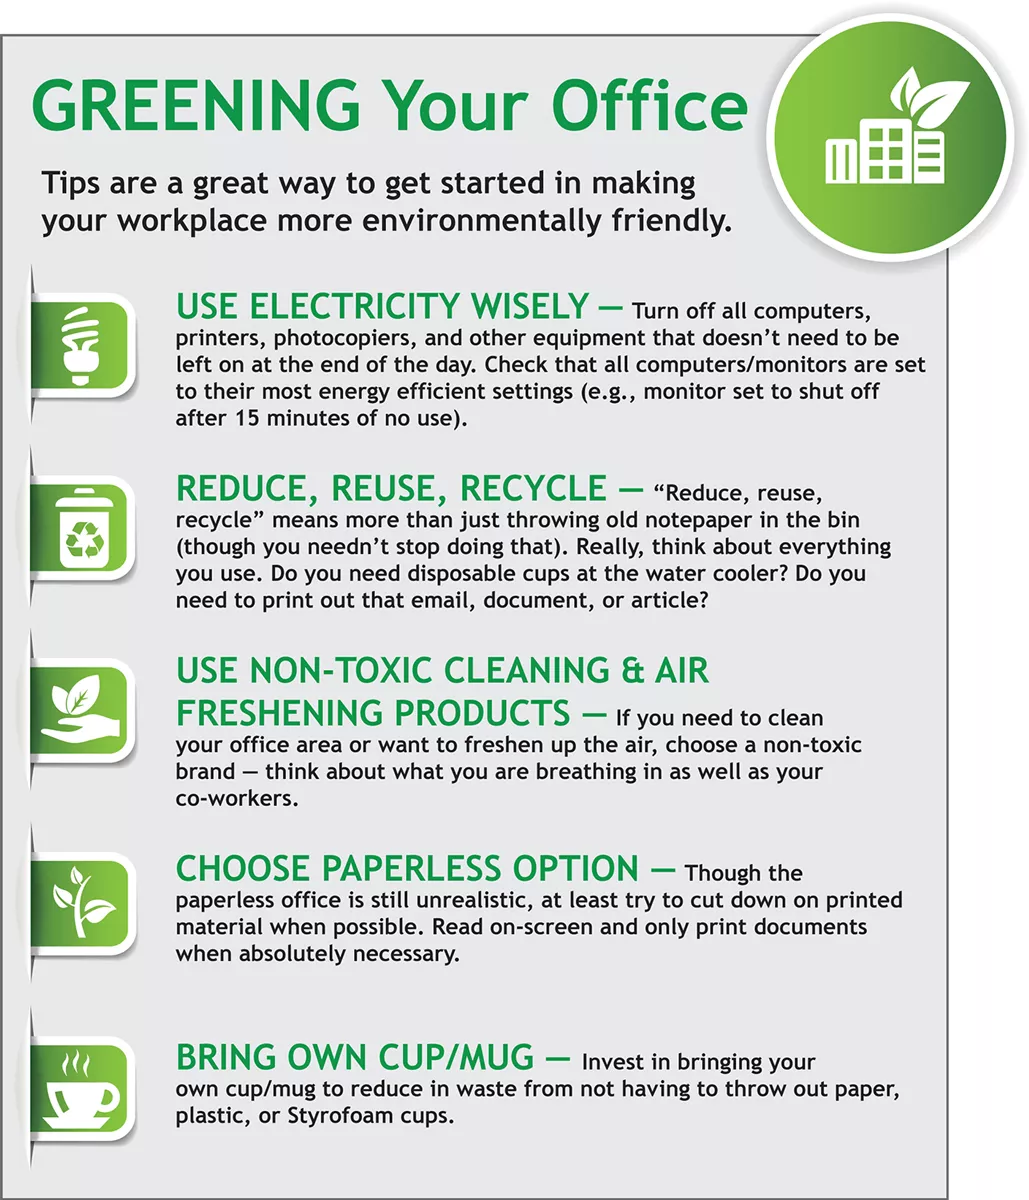 Infographic showing Greening Your Office tips including use electricity wisely, recycle, use non-toxic products, go paperless, bring own cup.